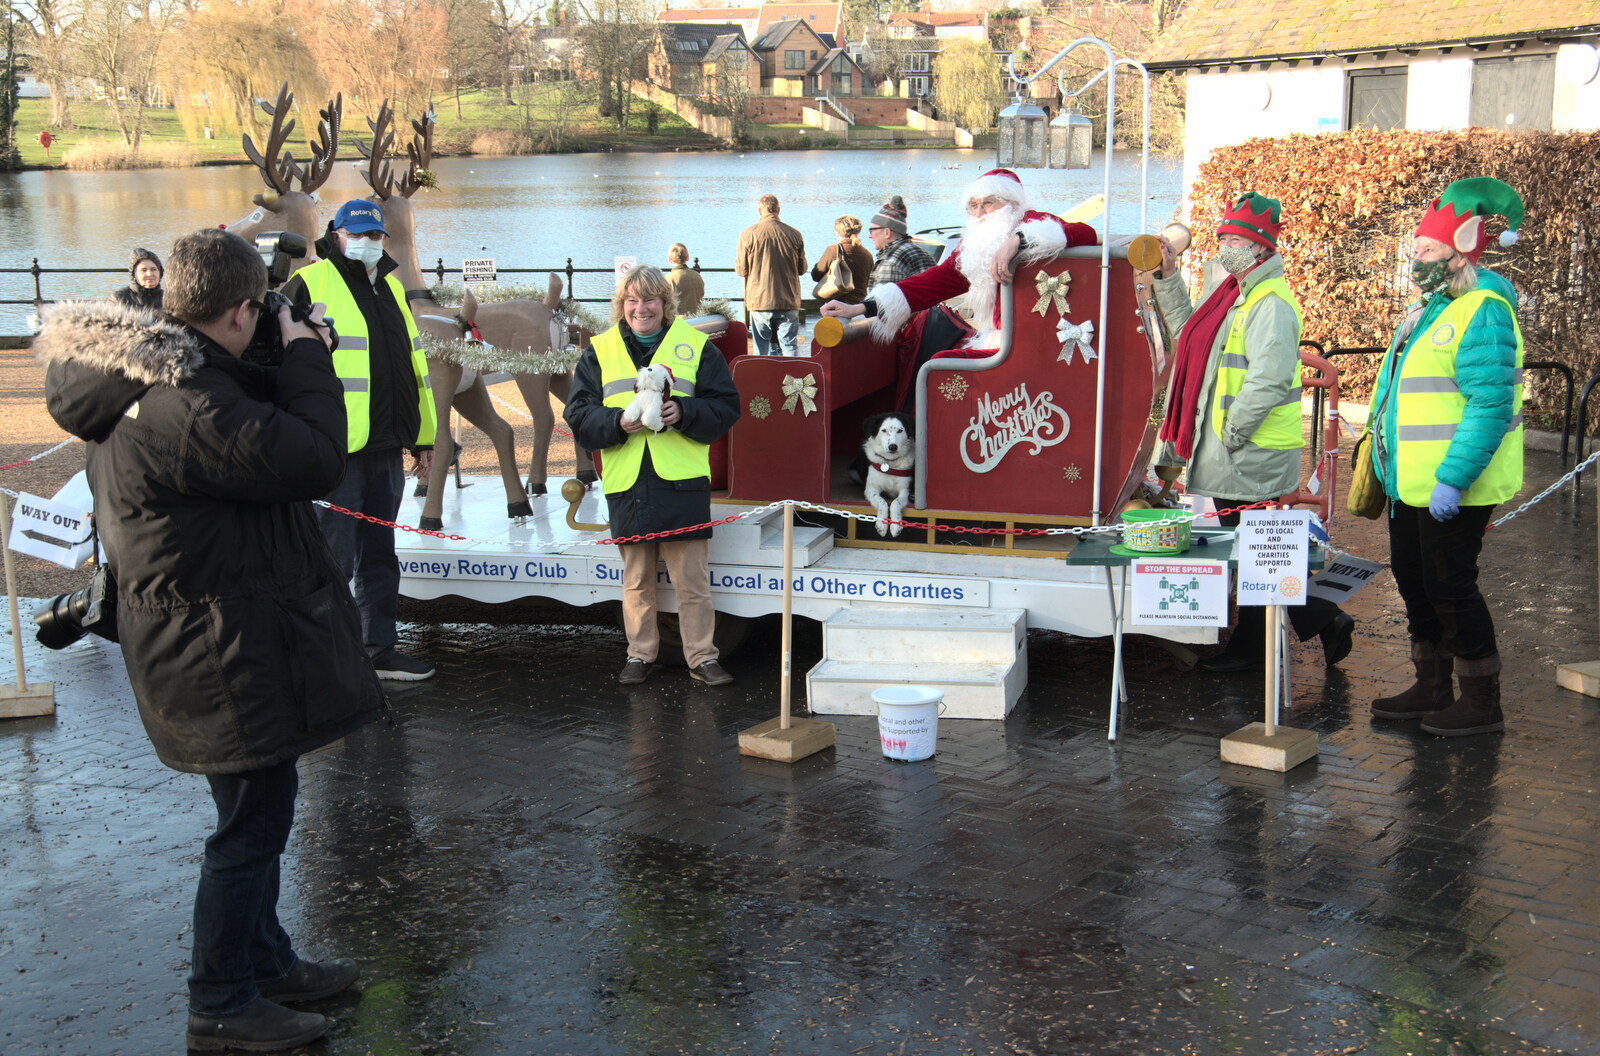 The Rotary Club are out with their Santa sleigh from Joe Wicks and Diss on Saturday, Norfolk - 19th December 2020